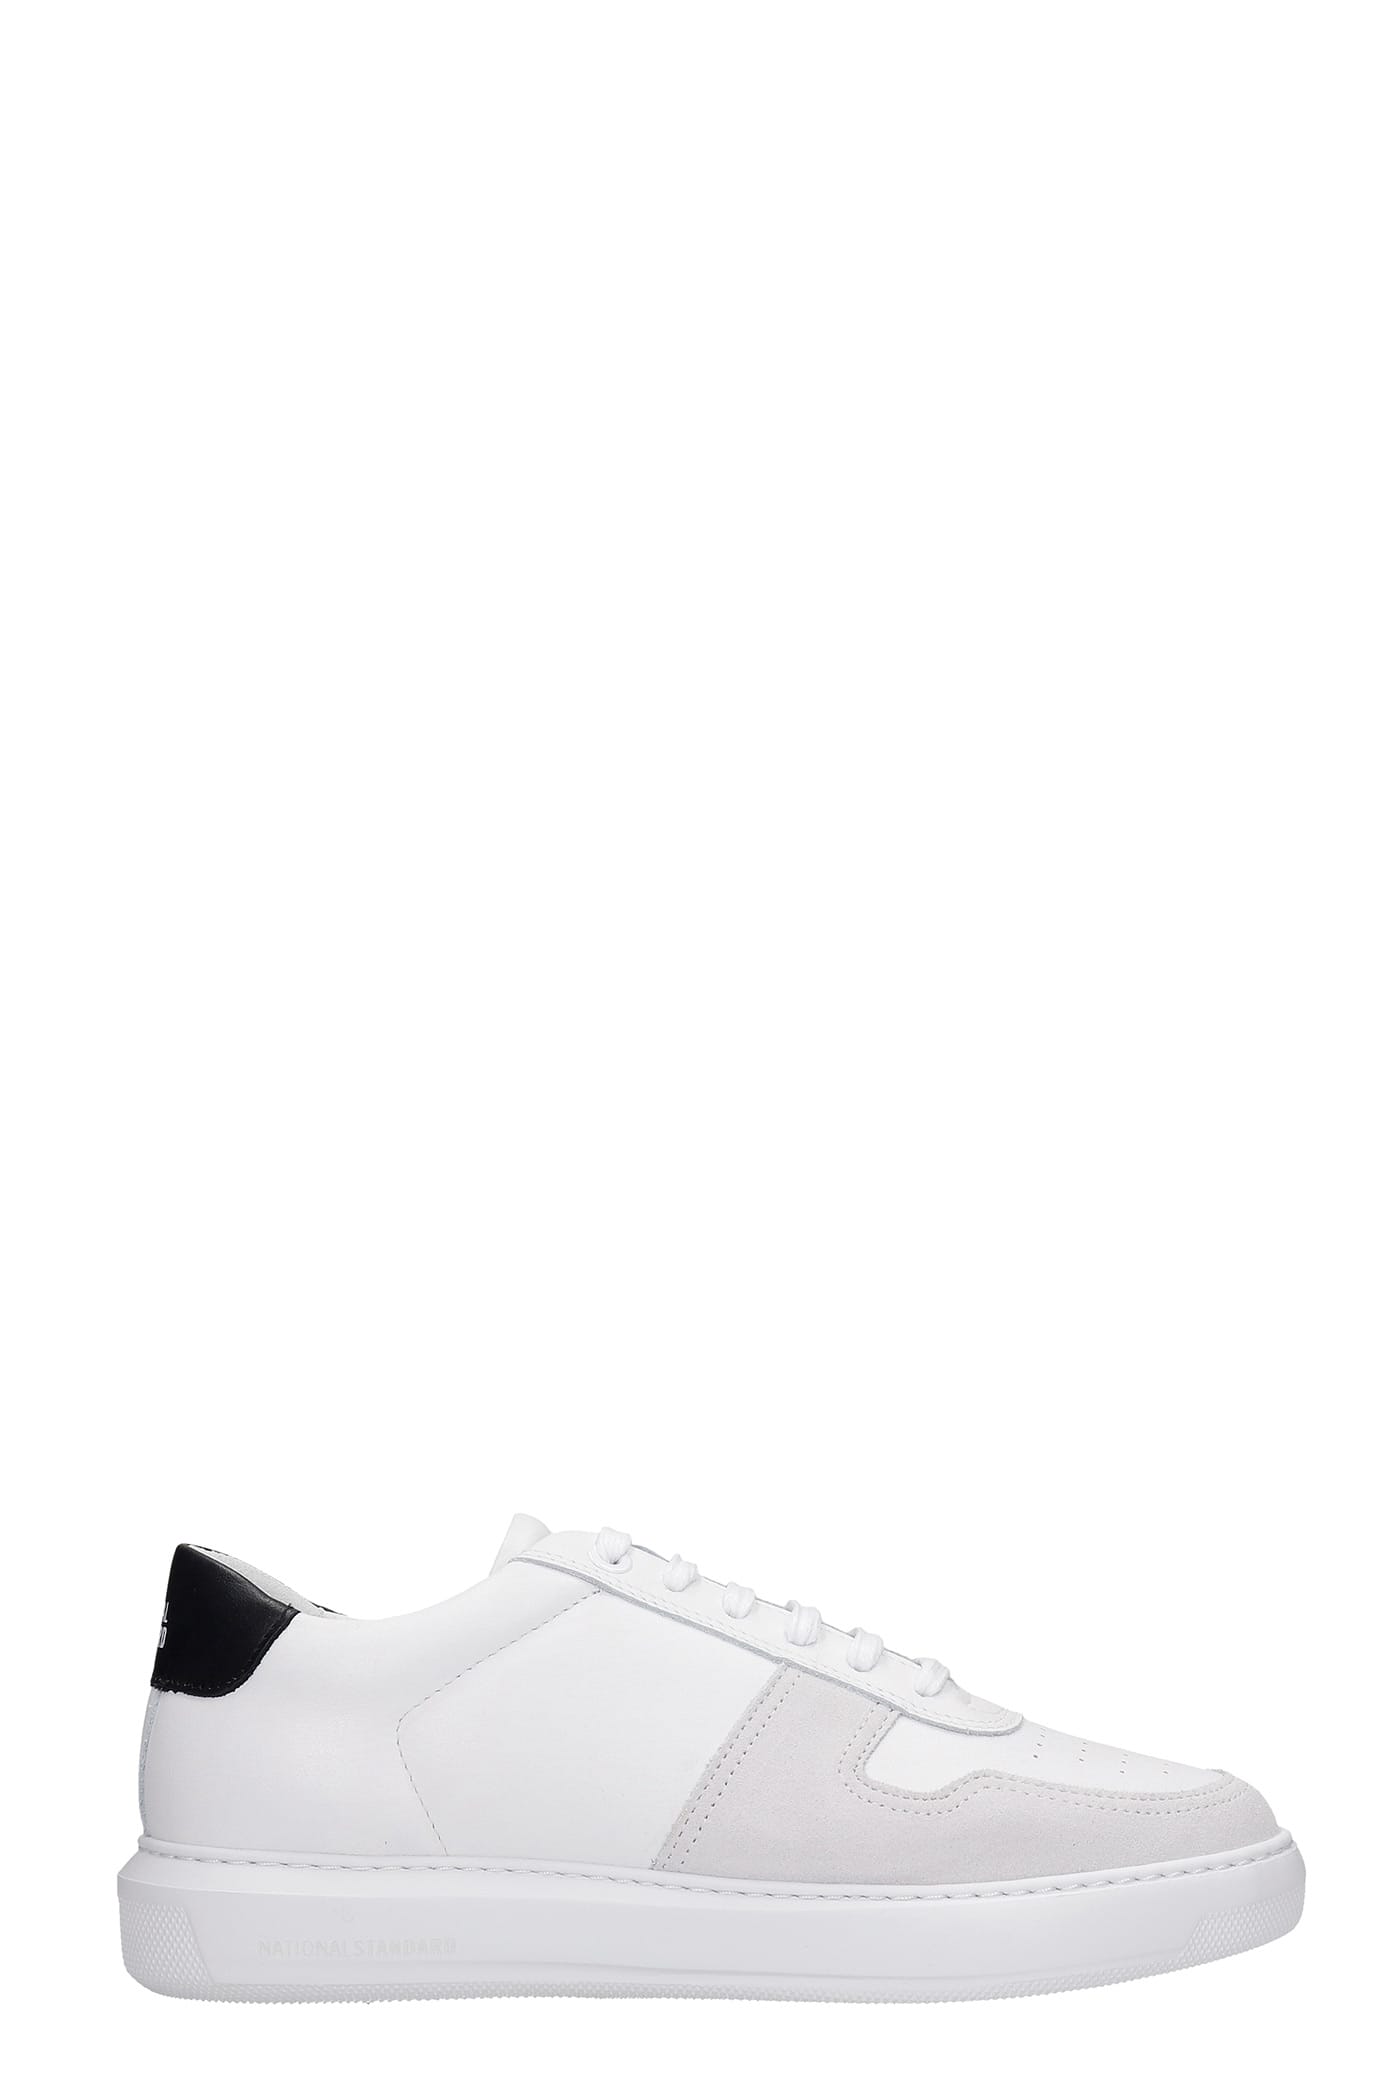 National Standard Edition 11 Sneakers In White Suede And Leather